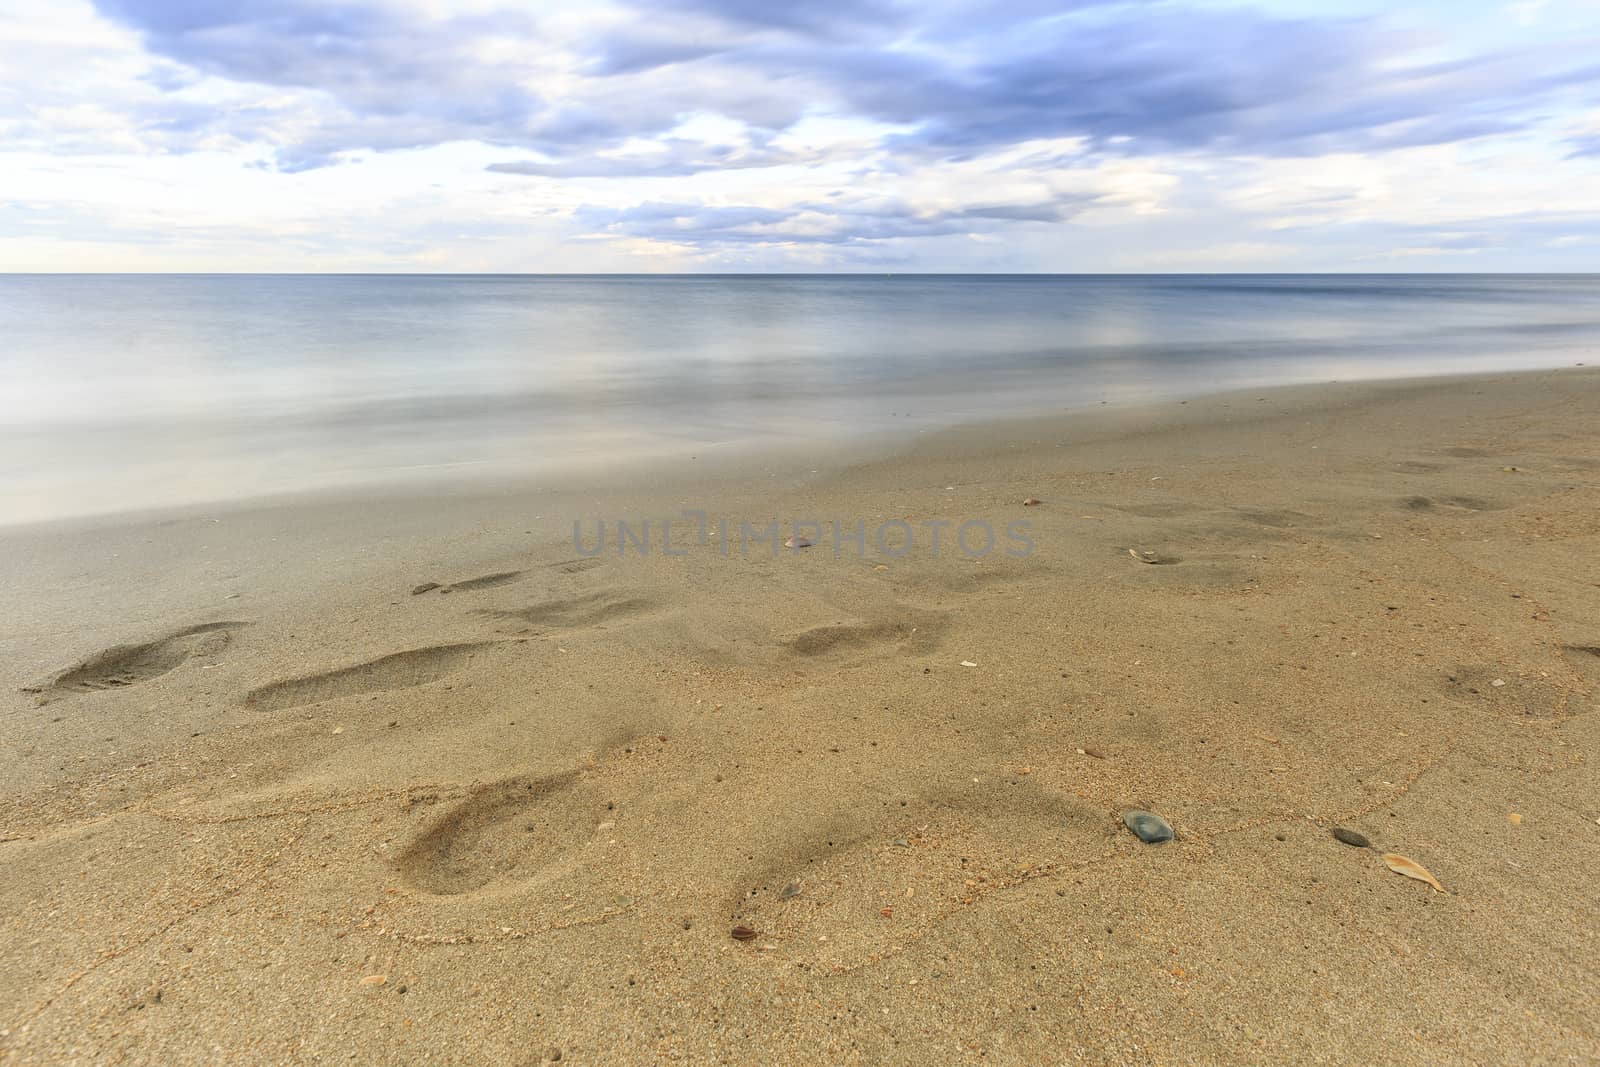 Long exposure photography on  the beach